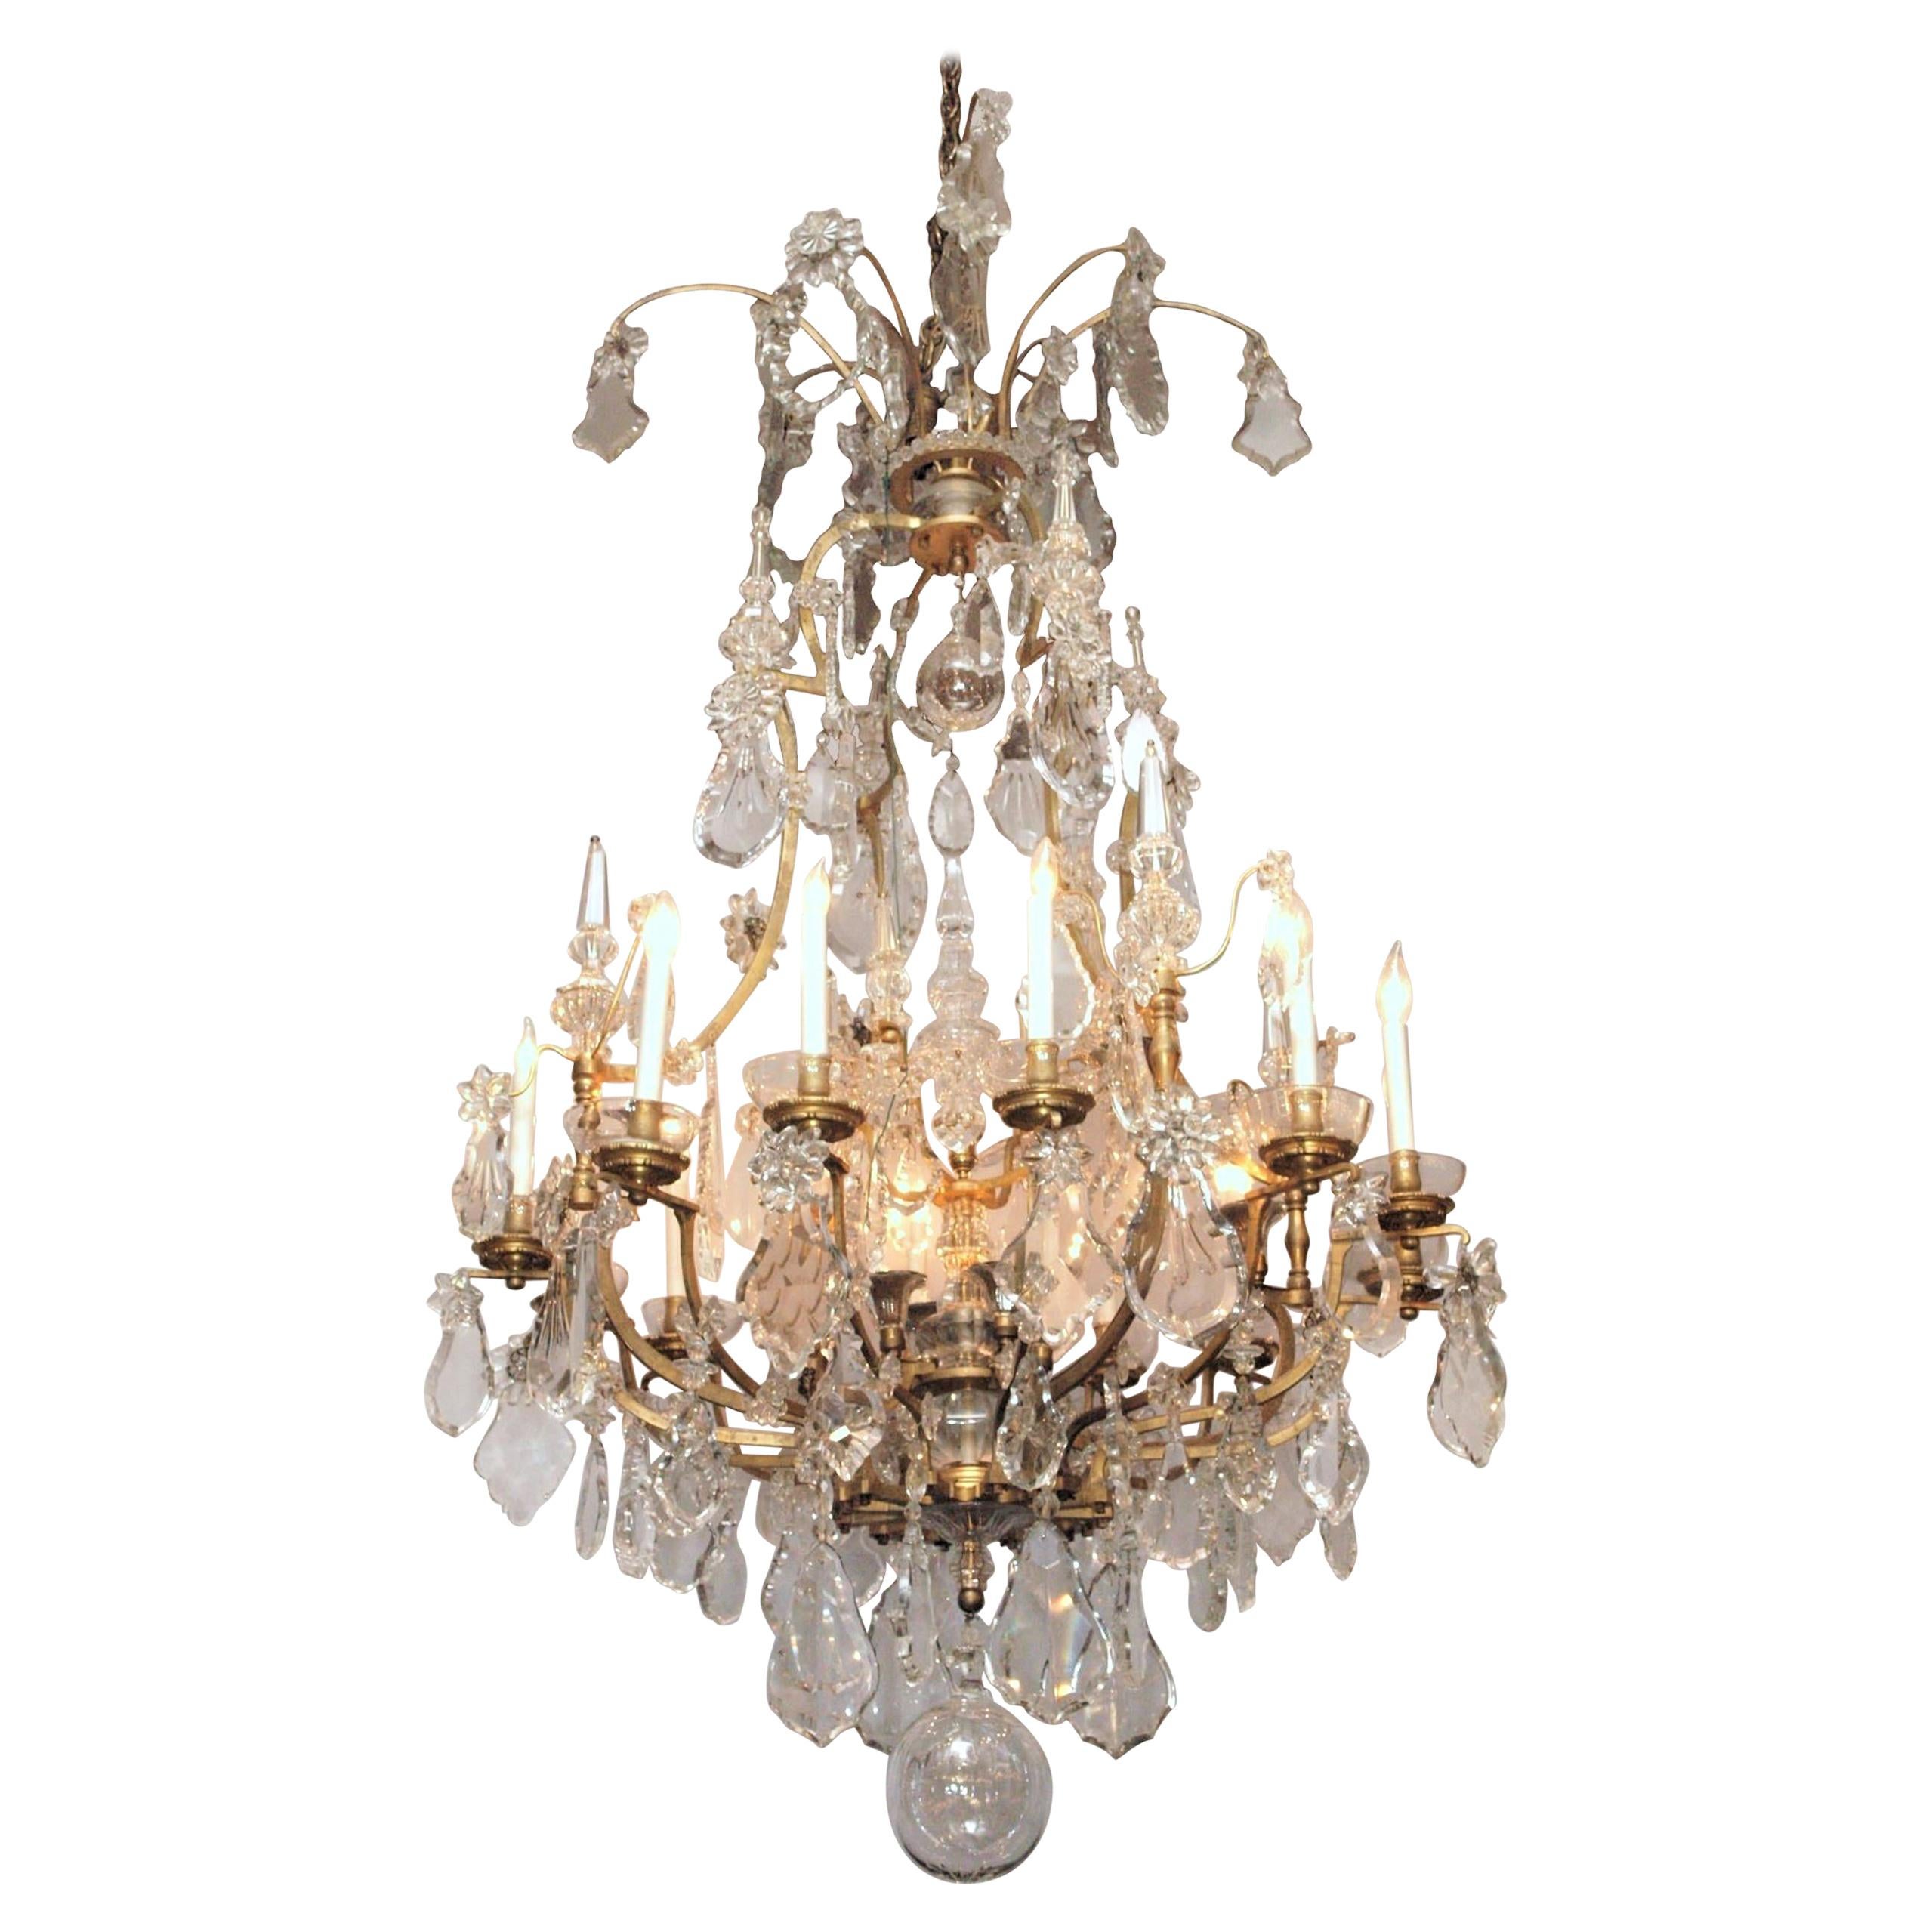 Antique French Baccarat Crystal & Bronze D'Ore Versailles Chandelier, circa 1880